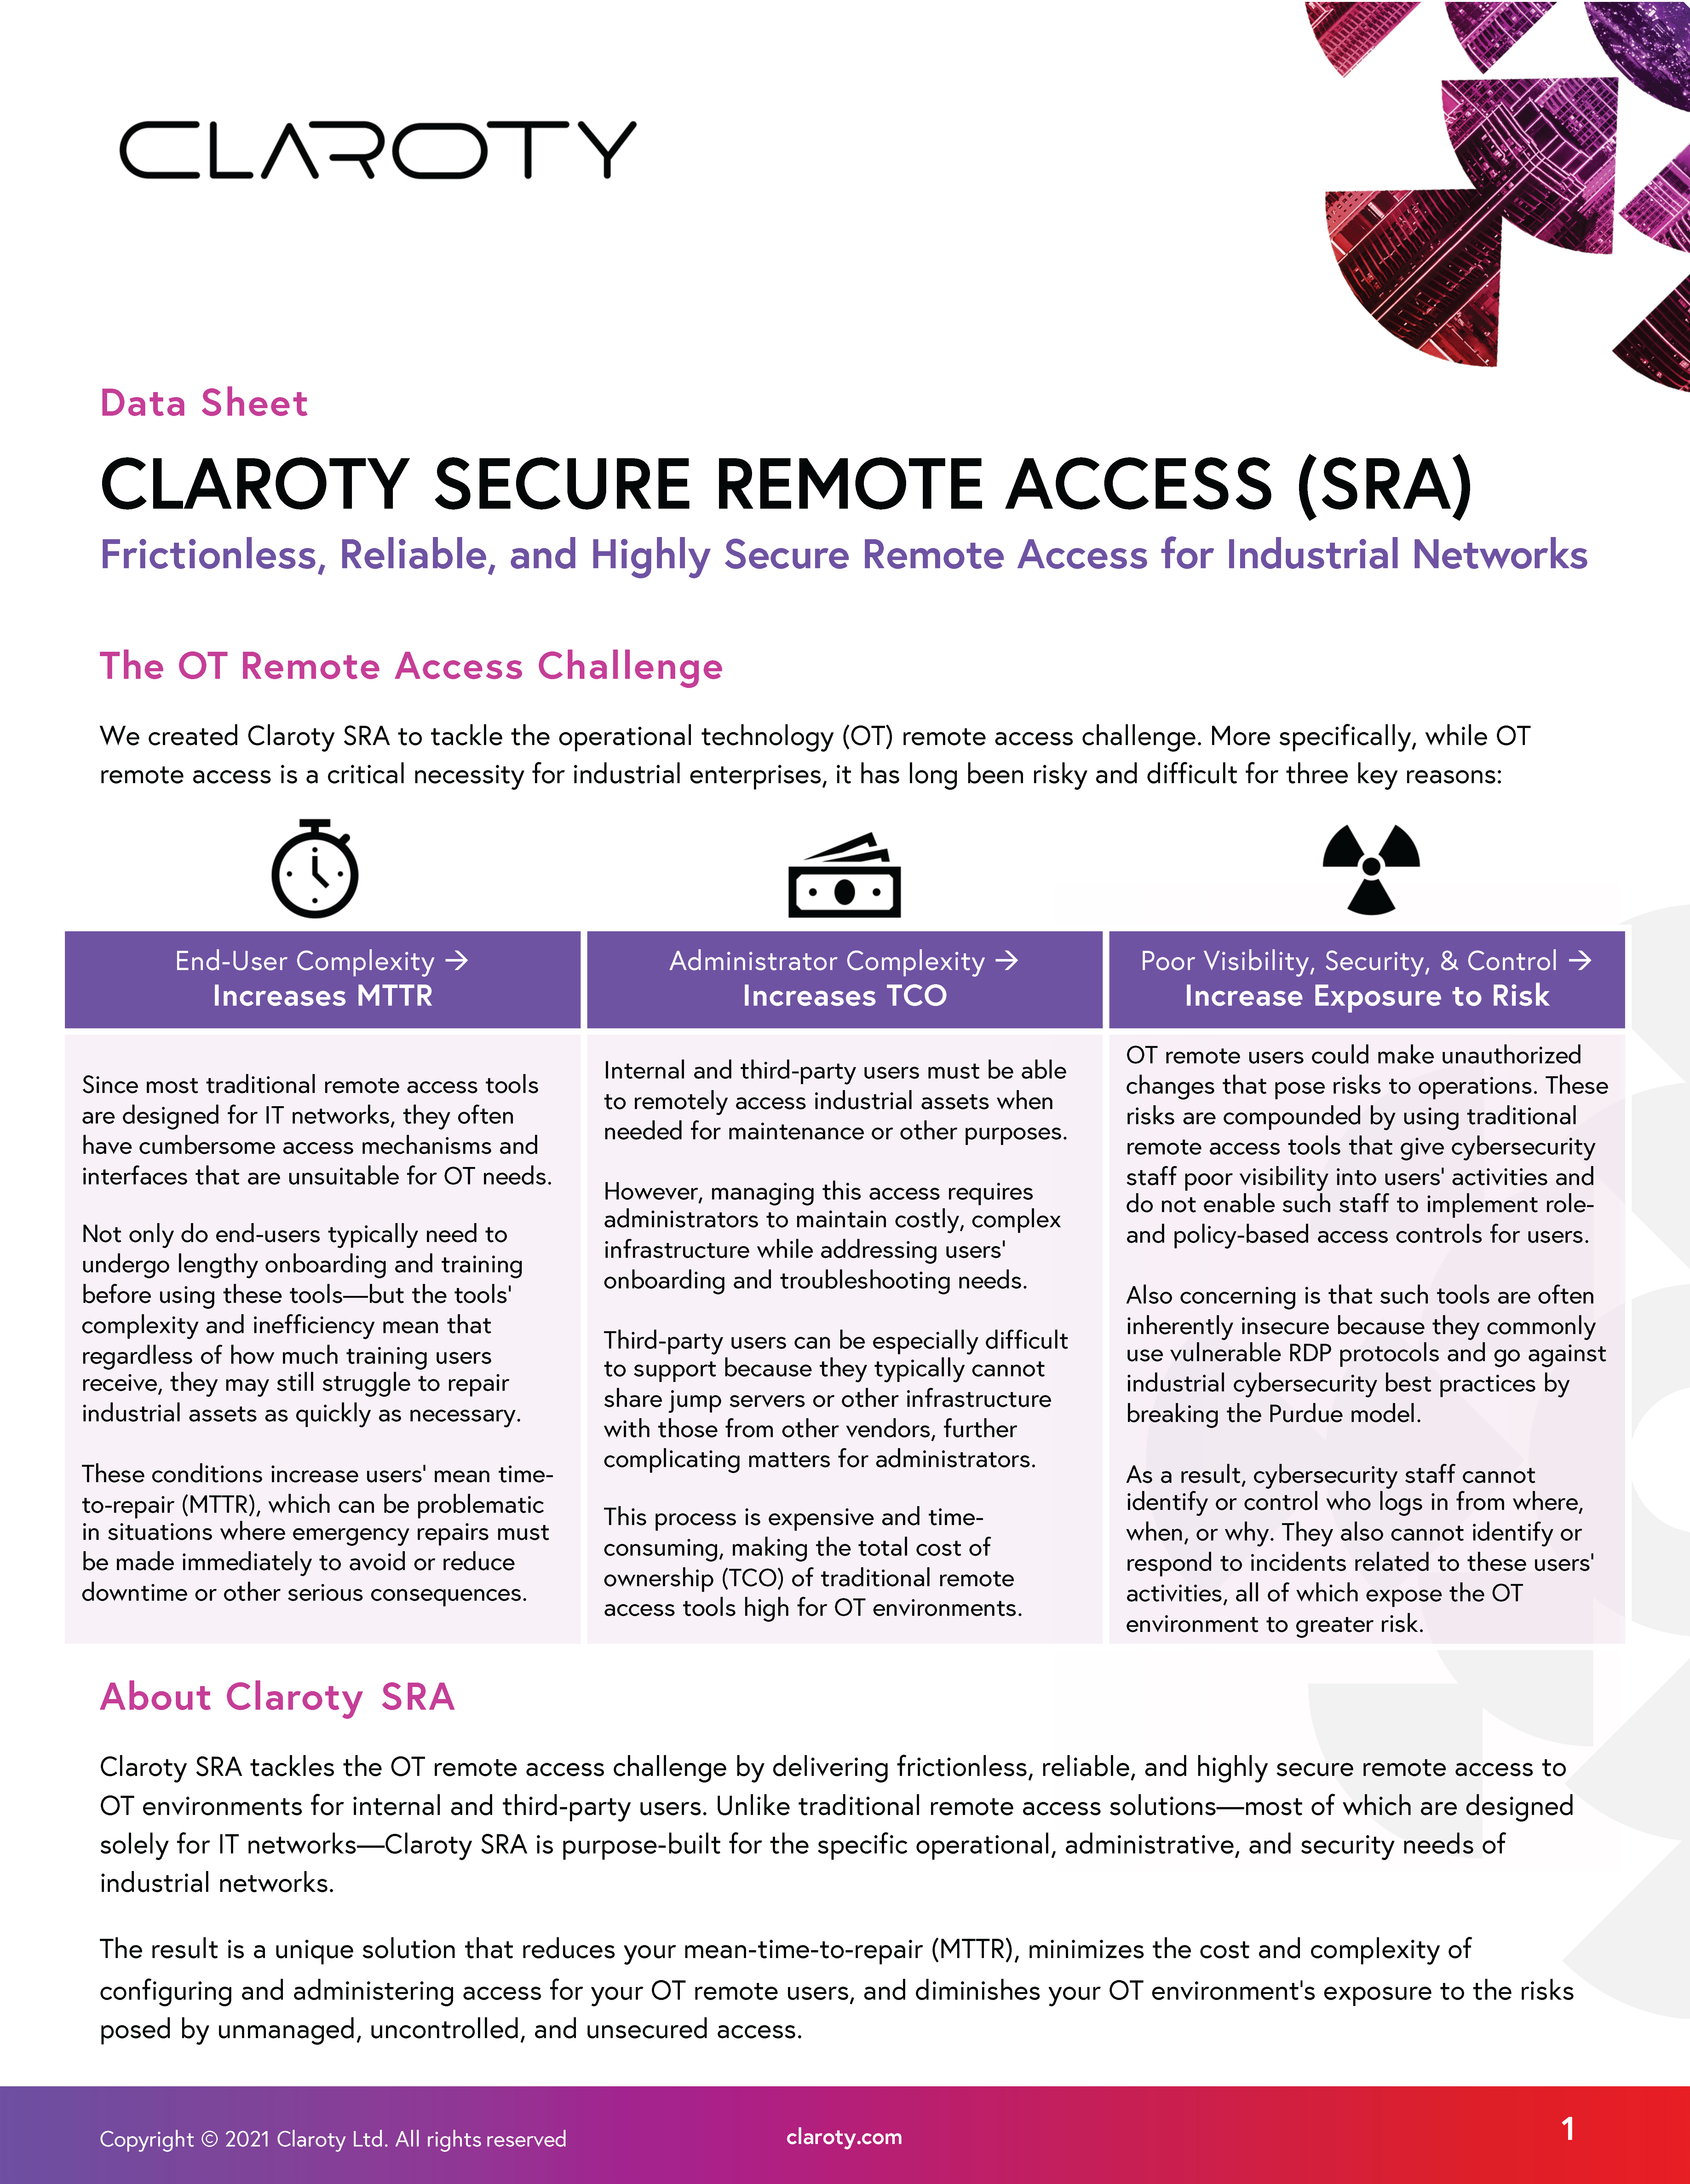 Pages from Claroty Secure Remote Access Datasheet